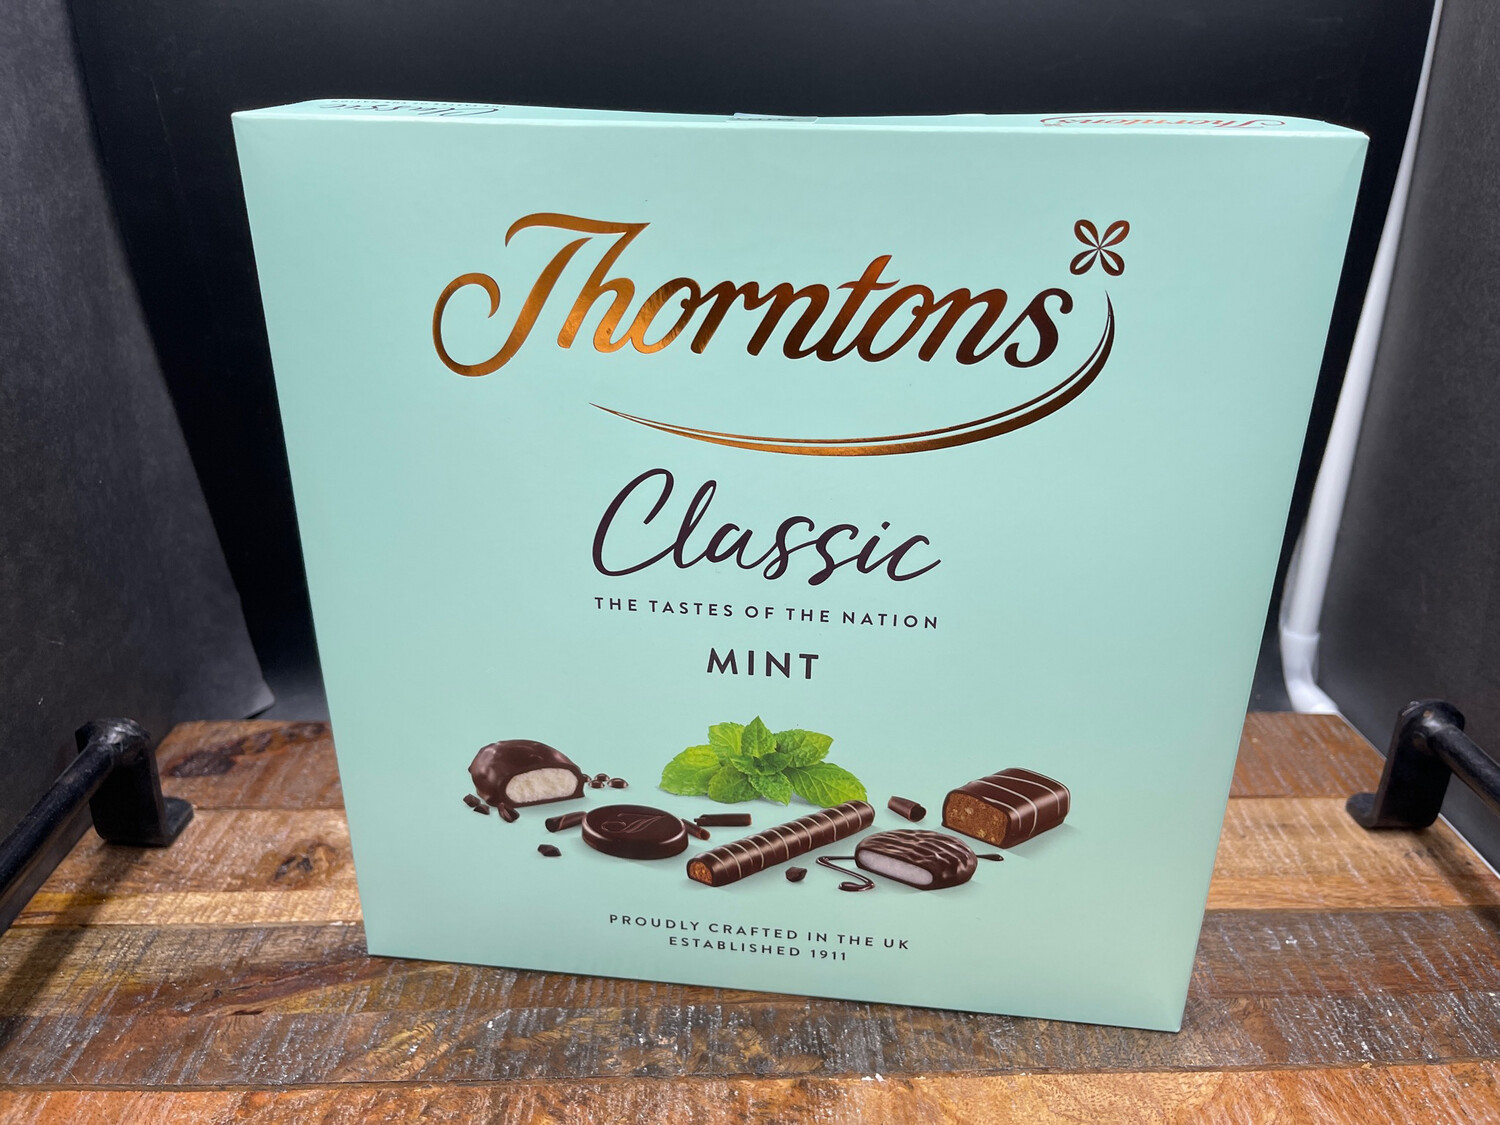 Thorntons Classic Mint Selection Box 233g